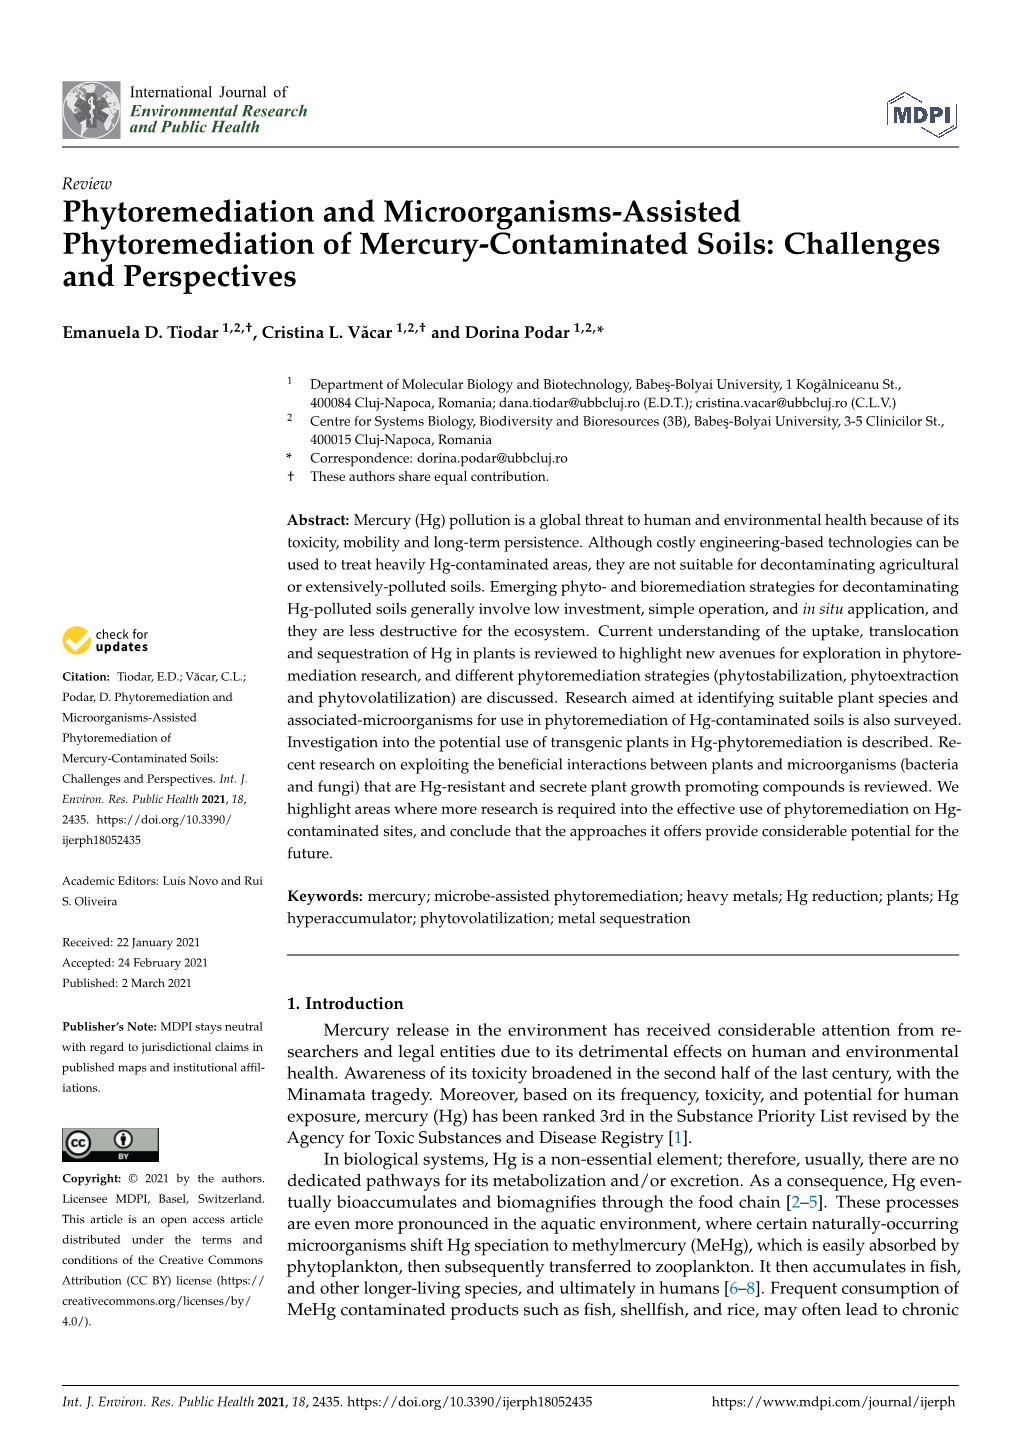 Phytoremediation and Microorganisms-Assisted Phytoremediation of Mercury-Contaminated Soils: Challenges and Perspectives